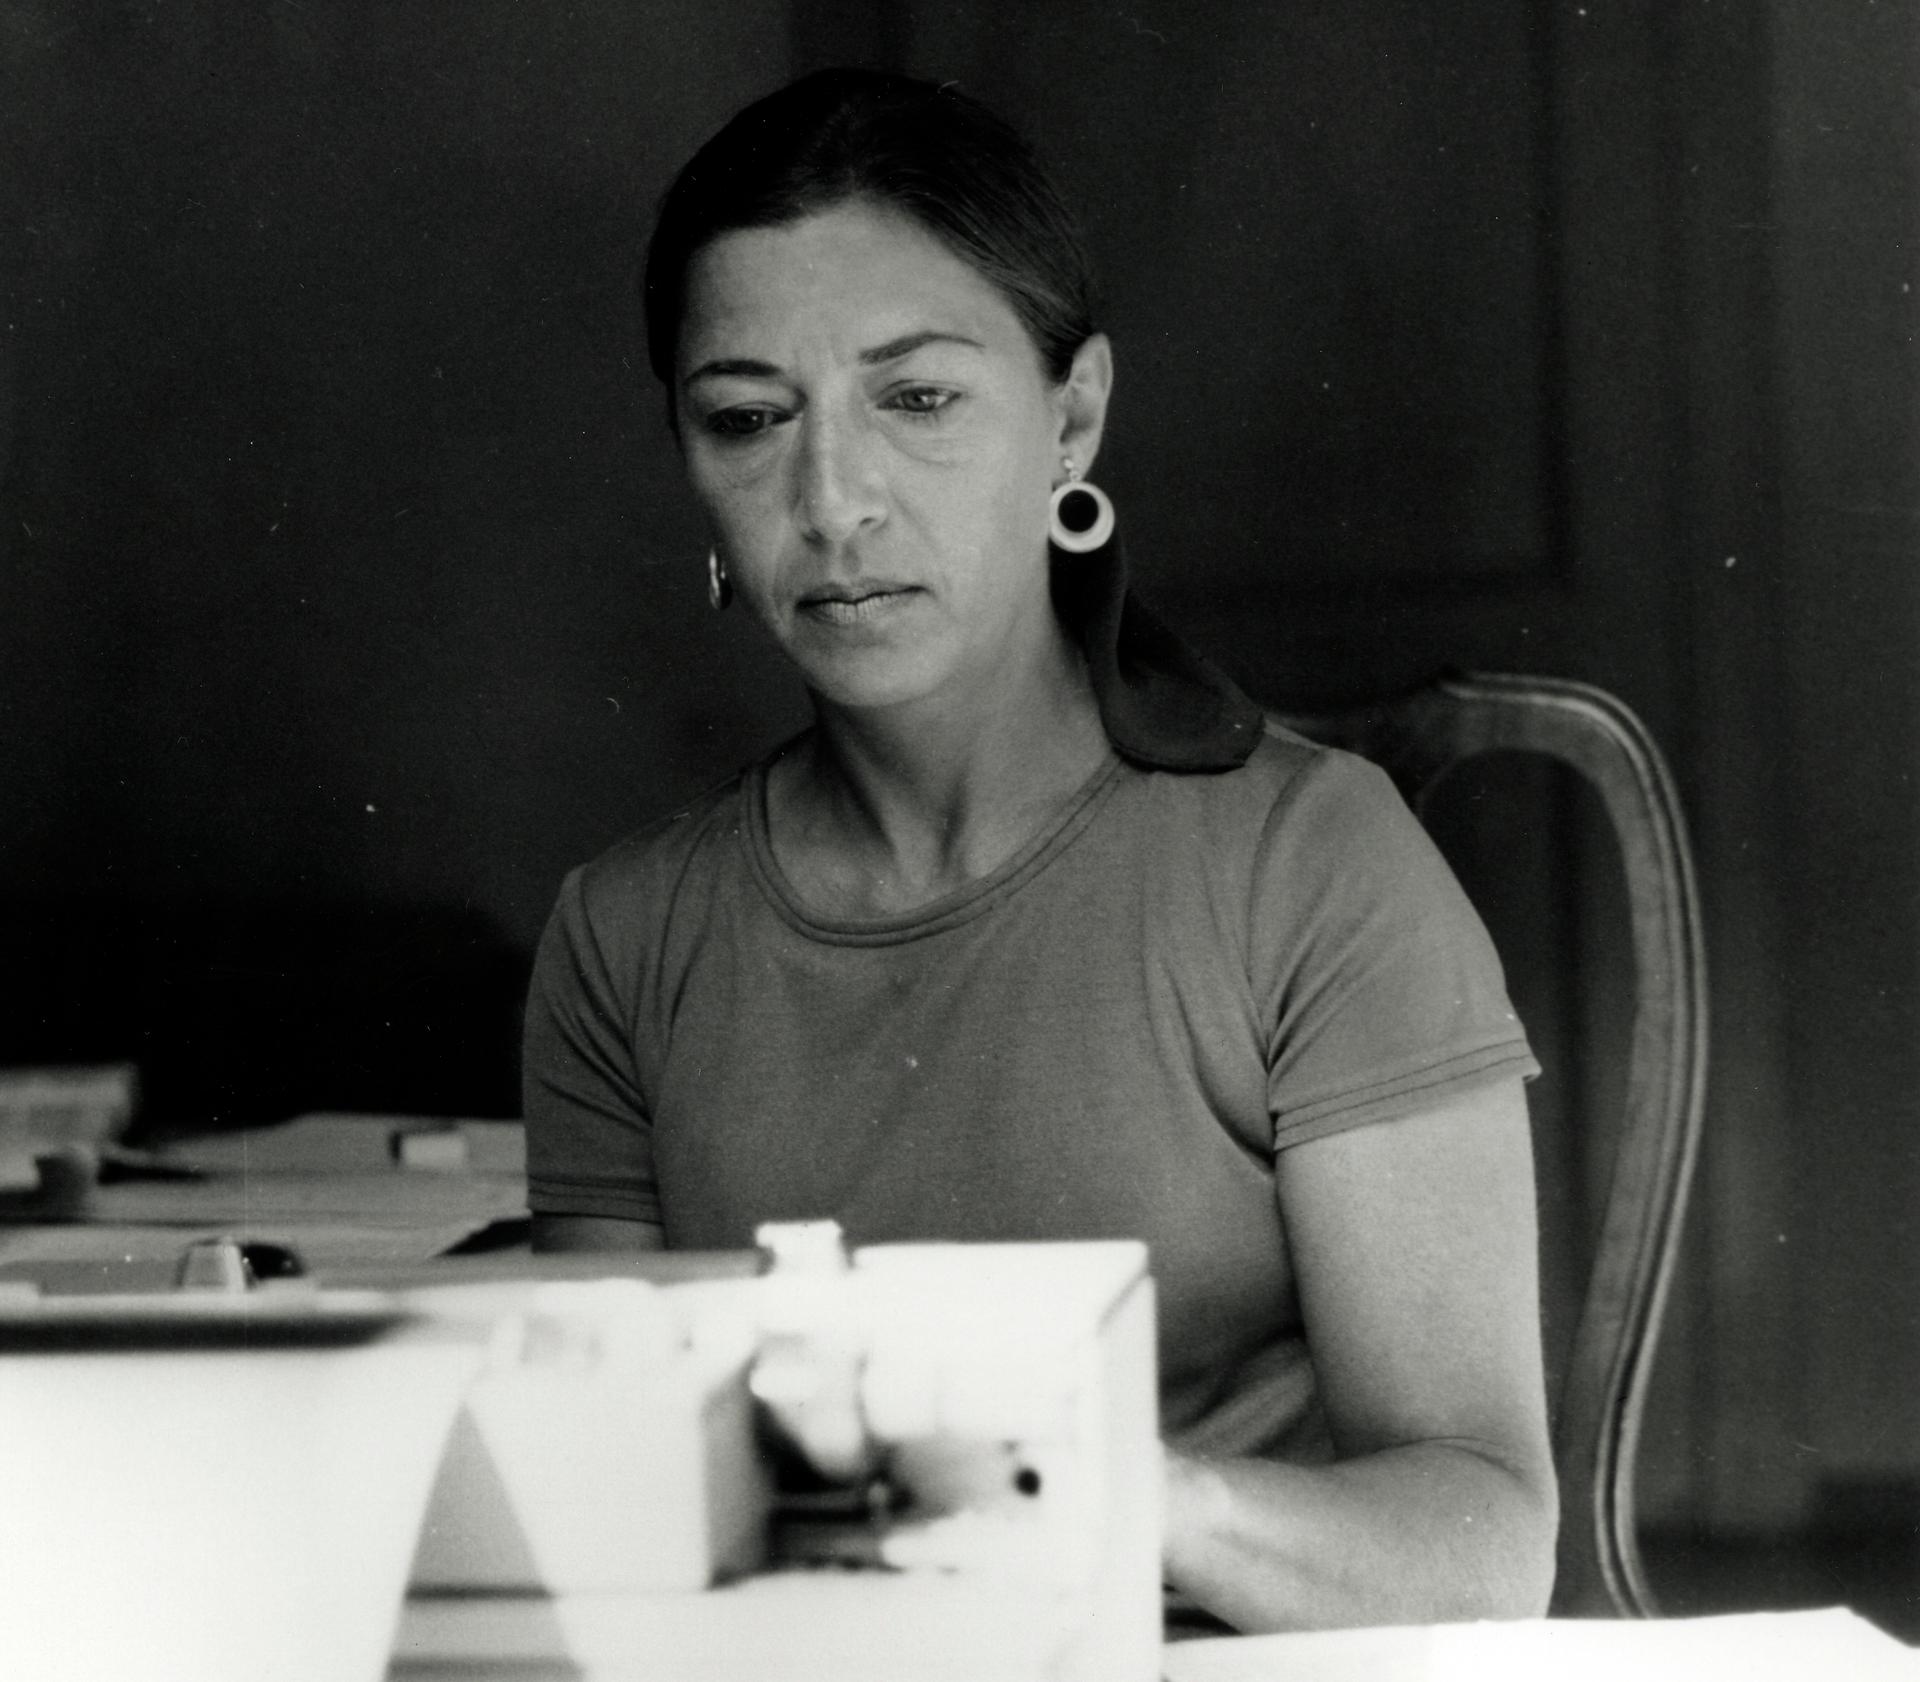 Black and white photo of young Ruth Bader Ginsburg wearing a casual shirt with her hair pulled back